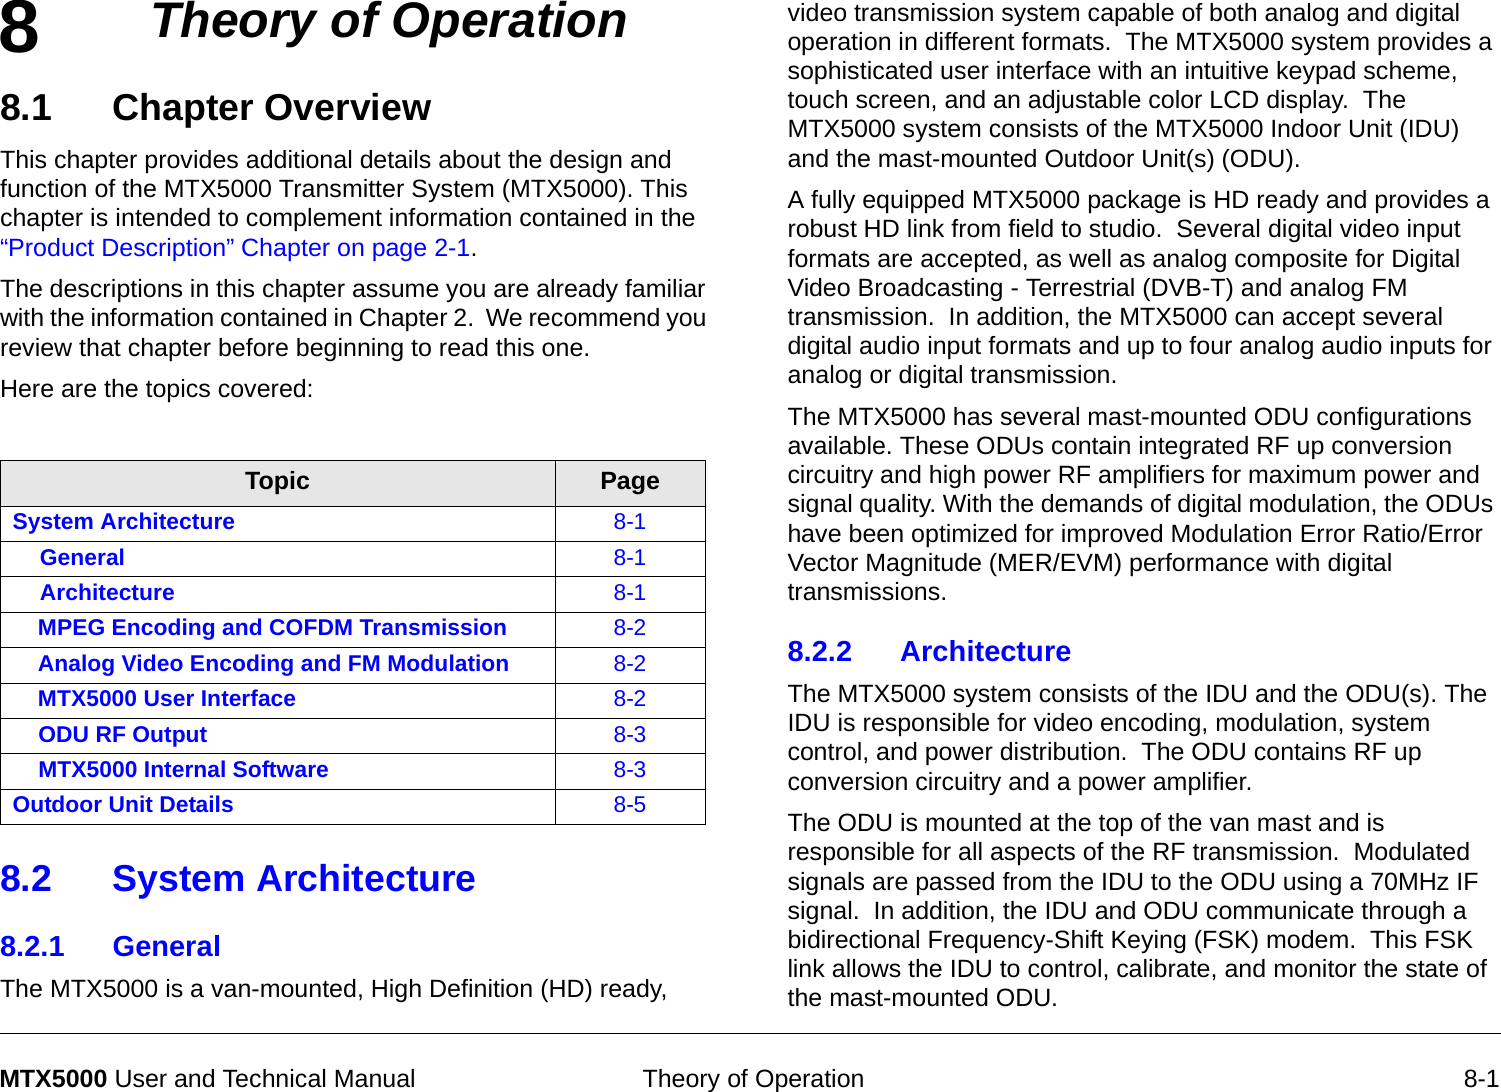 8 Theory of Operation 8-1MTX5000 User and Technical ManualTheory of Operation8.1 Chapter OverviewThis chapter provides additional details about the design and function of the MTX5000 Transmitter System (MTX5000). This chapter is intended to complement information contained in the “Product Description” Chapter on page 2-1. The descriptions in this chapter assume you are already familiar with the information contained in Chapter 2.  We recommend you review that chapter before beginning to read this one.Here are the topics covered:8.2 System Architecture8.2.1 GeneralThe MTX5000 is a van-mounted, High Definition (HD) ready, Topic PageSystem Architecture 8-1General 8-1Architecture 8-1MPEG Encoding and COFDM Transmission 8-2Analog Video Encoding and FM Modulation 8-2MTX5000 User Interface 8-2ODU RF Output 8-3MTX5000 Internal Software 8-3Outdoor Unit Details 8-5video transmission system capable of both analog and digital operation in different formats.  The MTX5000 system provides a sophisticated user interface with an intuitive keypad scheme, touch screen, and an adjustable color LCD display.  The MTX5000 system consists of the MTX5000 Indoor Unit (IDU) and the mast-mounted Outdoor Unit(s) (ODU).A fully equipped MTX5000 package is HD ready and provides a robust HD link from field to studio.  Several digital video input formats are accepted, as well as analog composite for Digital Video Broadcasting - Terrestrial (DVB-T) and analog FM transmission.  In addition, the MTX5000 can accept several digital audio input formats and up to four analog audio inputs for analog or digital transmission.The MTX5000 has several mast-mounted ODU configurations available. These ODUs contain integrated RF up conversion circuitry and high power RF amplifiers for maximum power and signal quality. With the demands of digital modulation, the ODUs have been optimized for improved Modulation Error Ratio/Error Vector Magnitude (MER/EVM) performance with digital transmissions.8.2.2 Architecture The MTX5000 system consists of the IDU and the ODU(s). The IDU is responsible for video encoding, modulation, system control, and power distribution.  The ODU contains RF up conversion circuitry and a power amplifier.The ODU is mounted at the top of the van mast and is responsible for all aspects of the RF transmission.  Modulated signals are passed from the IDU to the ODU using a 70MHz IF signal.  In addition, the IDU and ODU communicate through a bidirectional Frequency-Shift Keying (FSK) modem.  This FSK link allows the IDU to control, calibrate, and monitor the state of the mast-mounted ODU. 